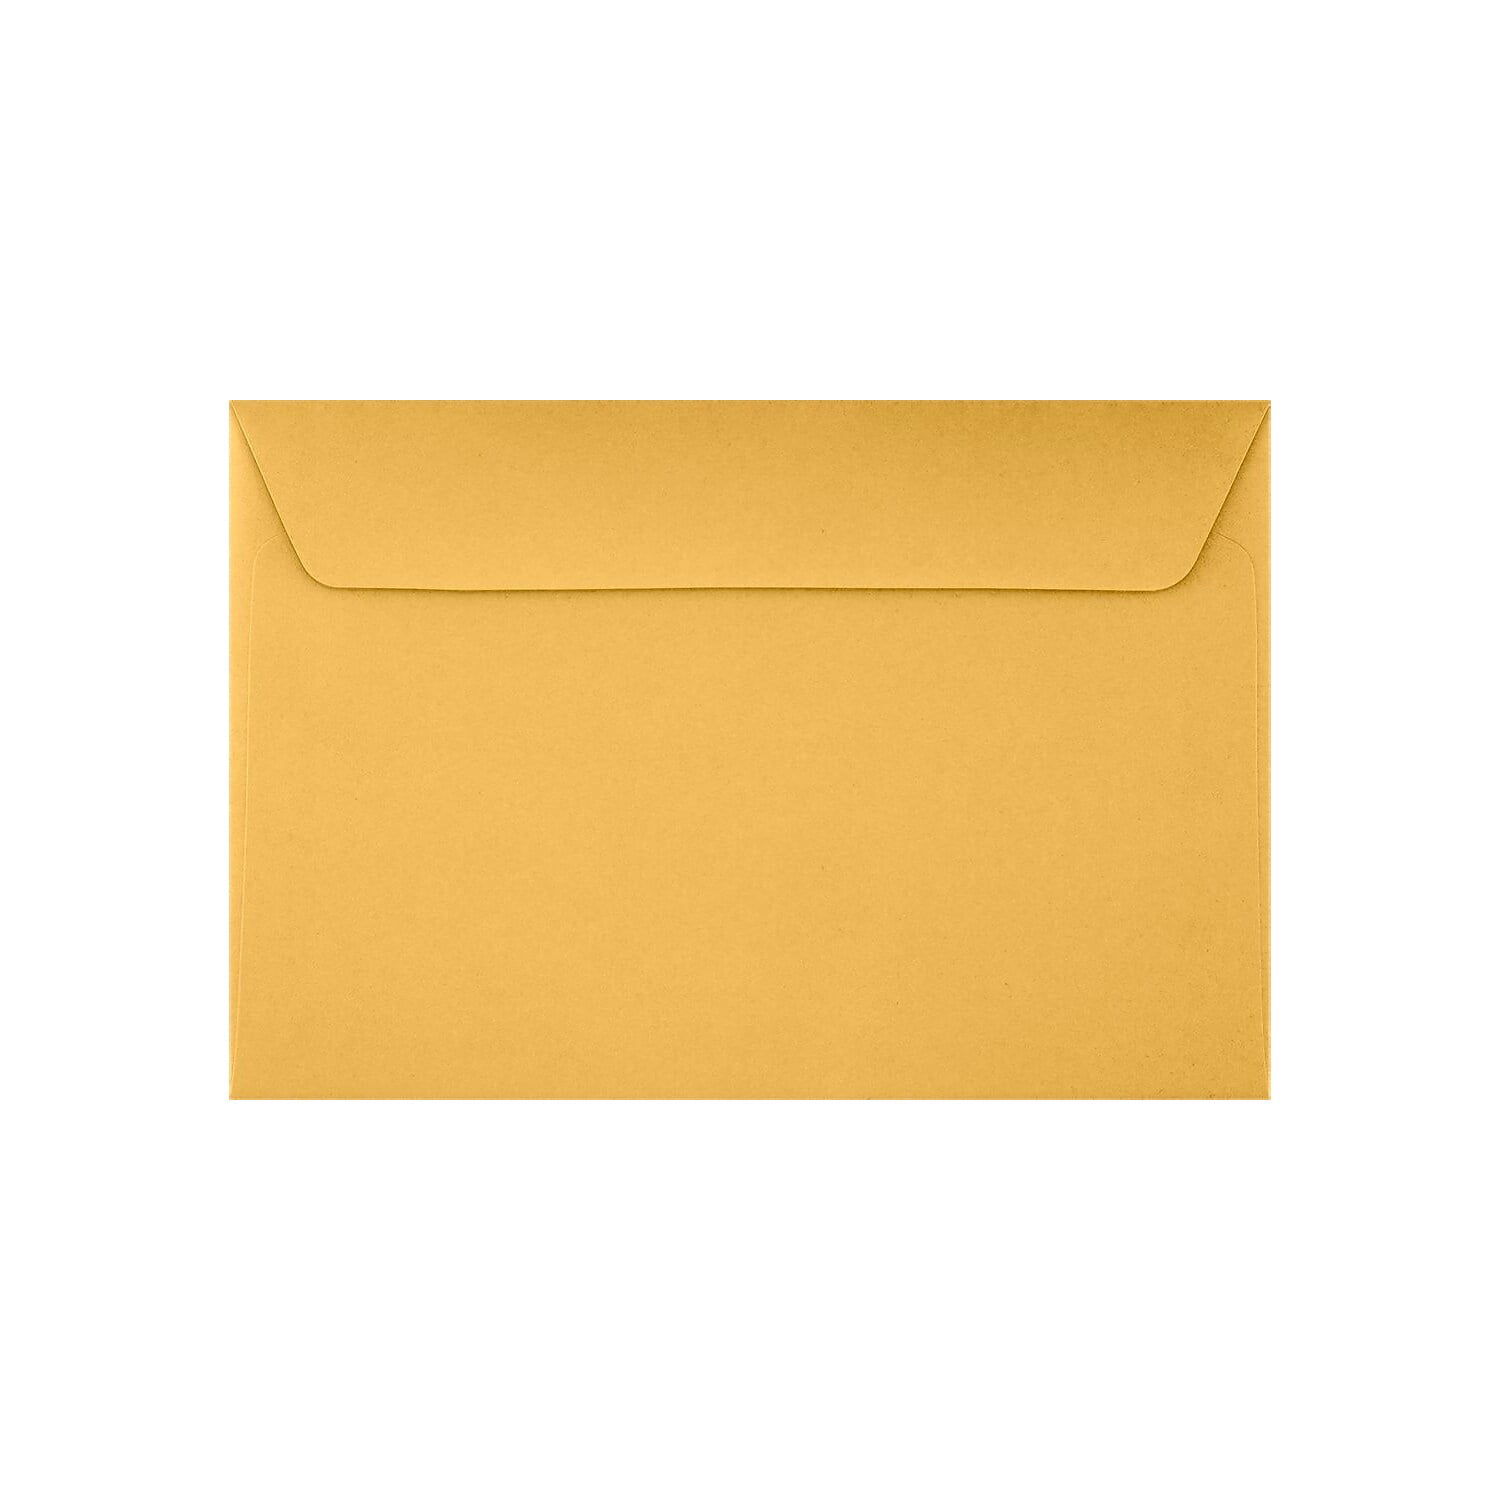 Invitations and More Magazines 500 Qty. 9 x 12 Booklet Envelopes Brochures Burgundy Linen Direct Mail Annual Reports | Perfect for Catalogs 4899-BGLI-500 